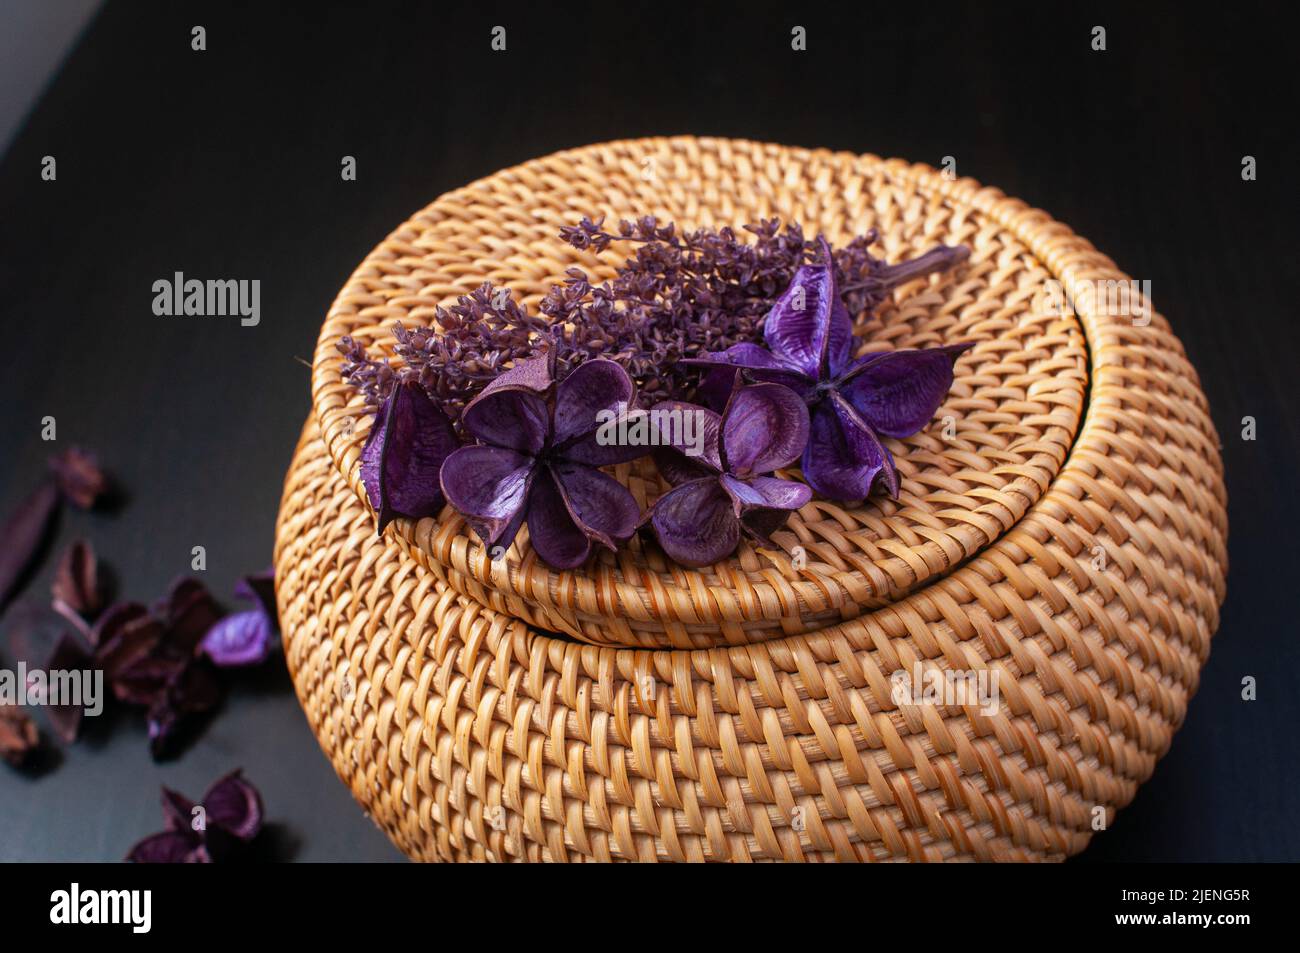 wicker straw box craft round top with dried flowers and lavender on a black background Stock Photo